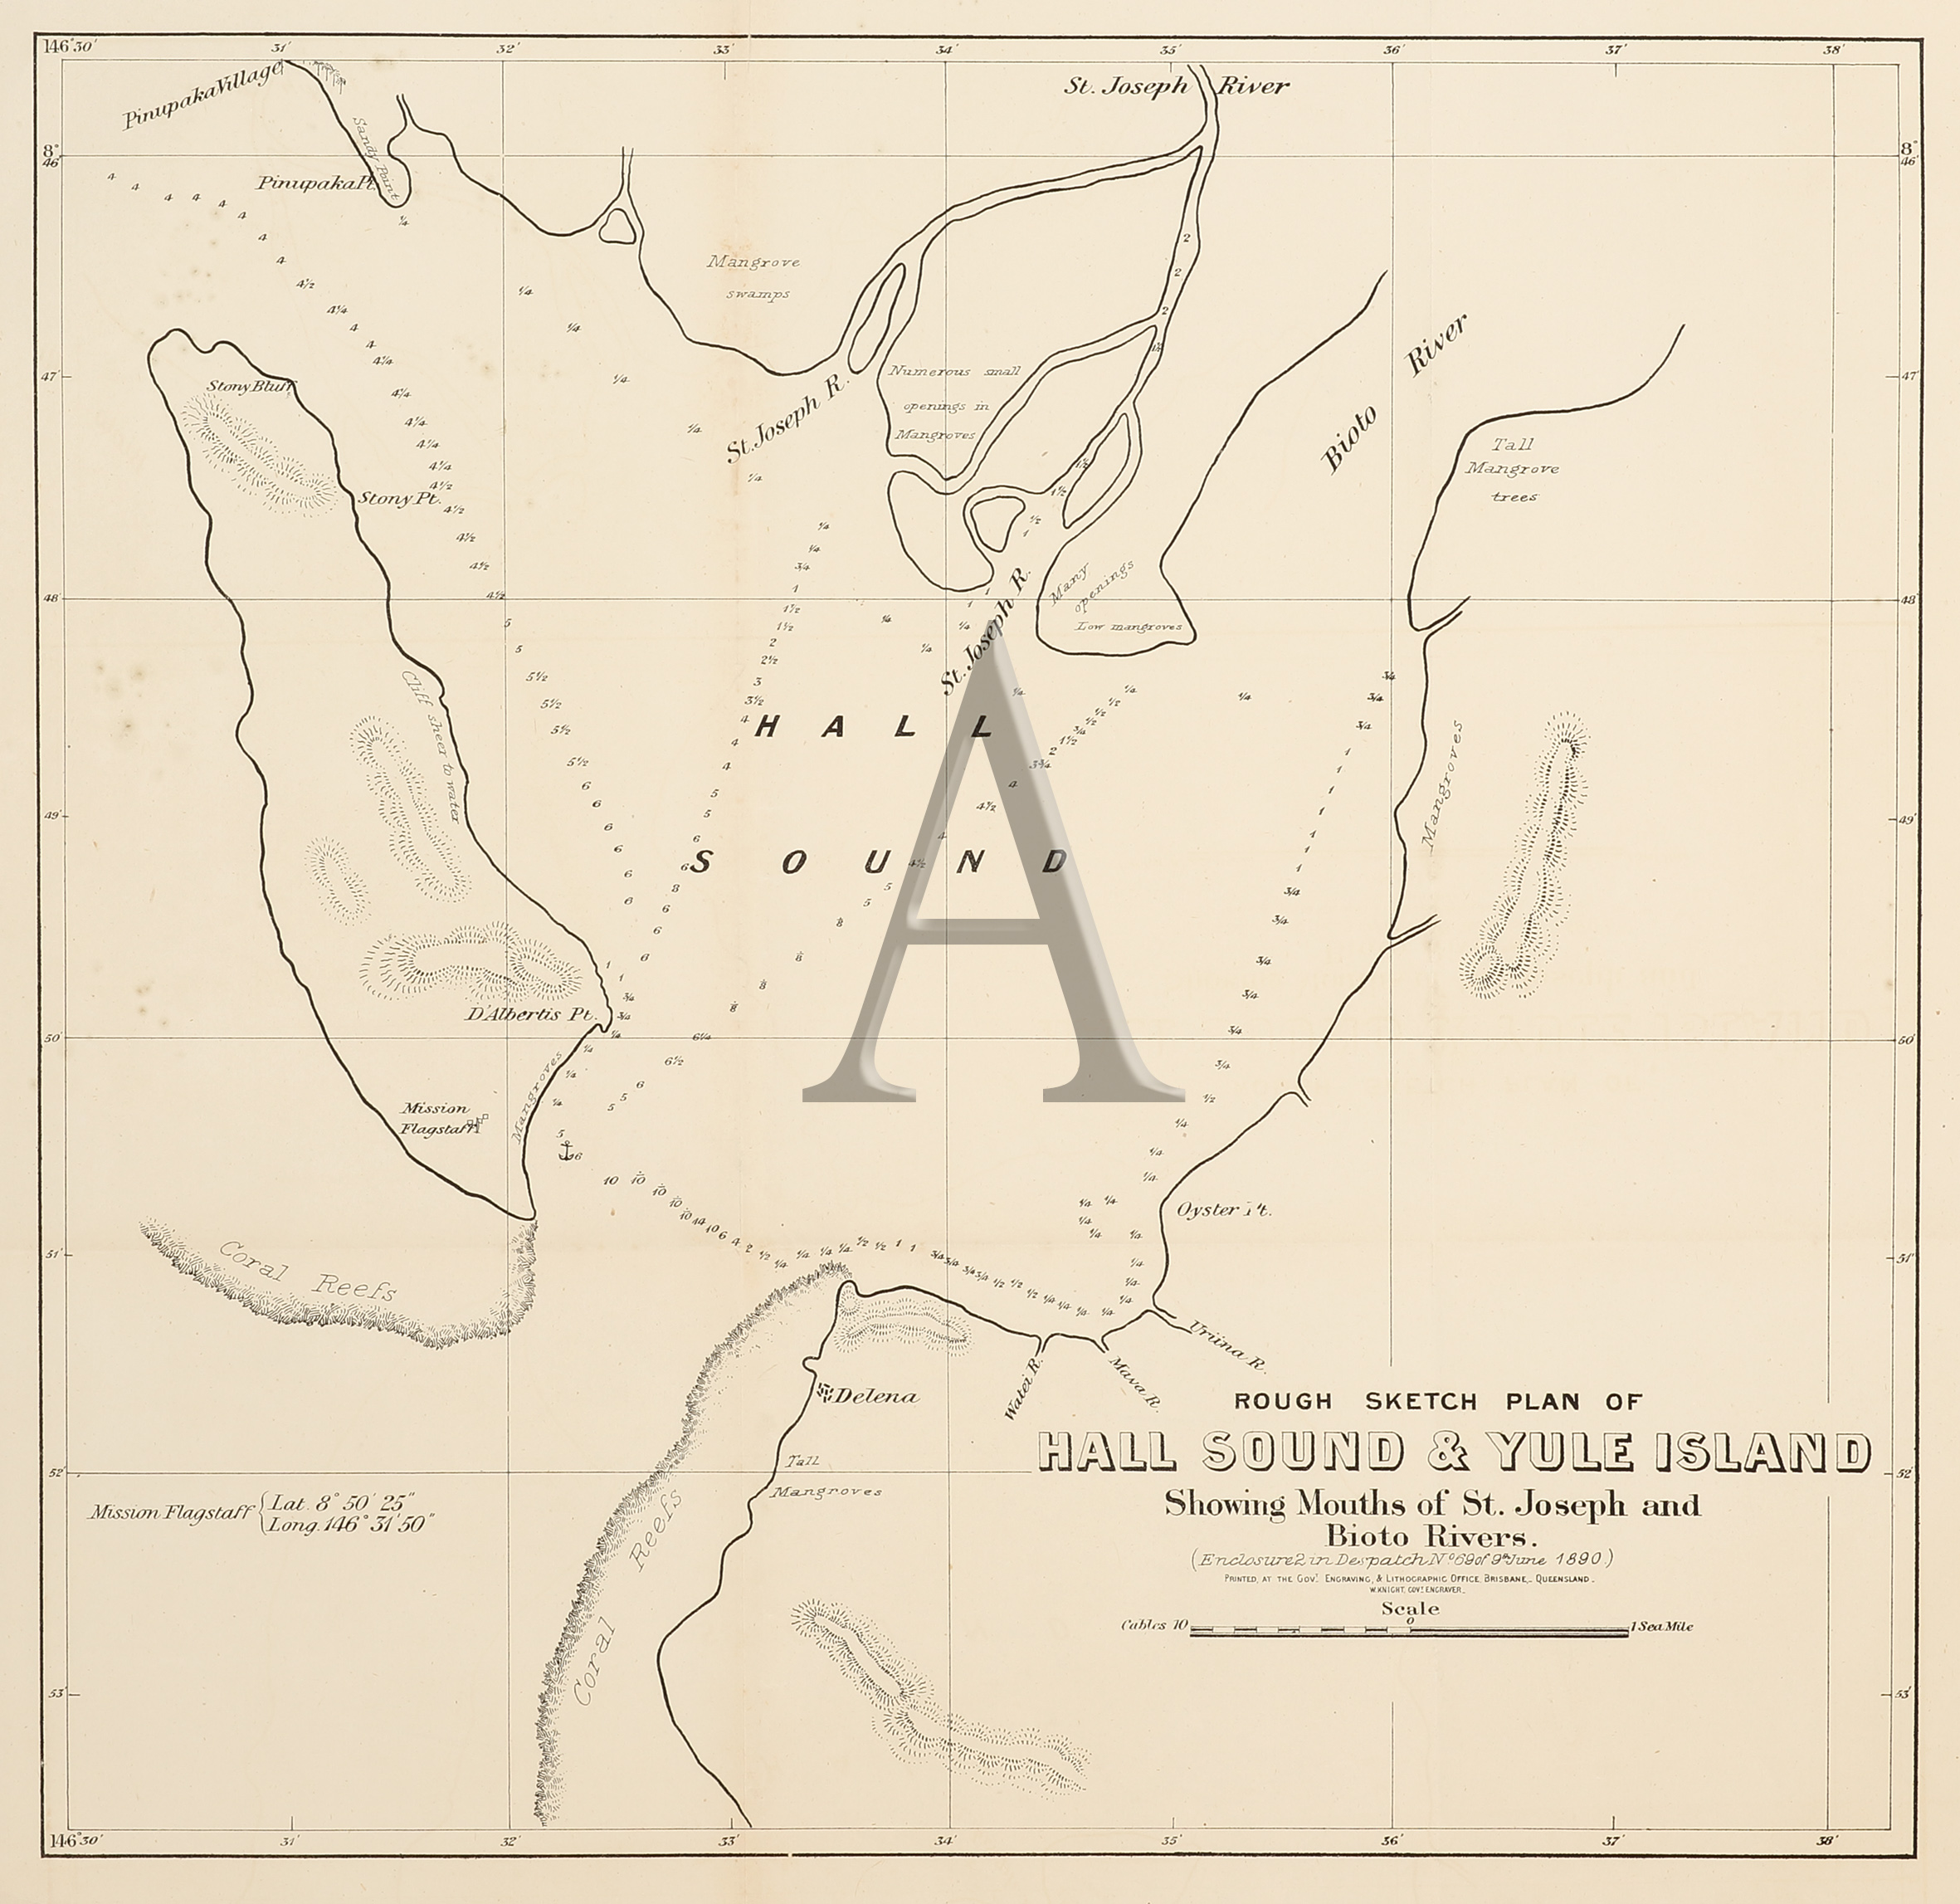 Rough Sketch Plan of Hall Sound & Yule Island Showing Mouths of St.Joseph and Bioto Rivers. New Guinea